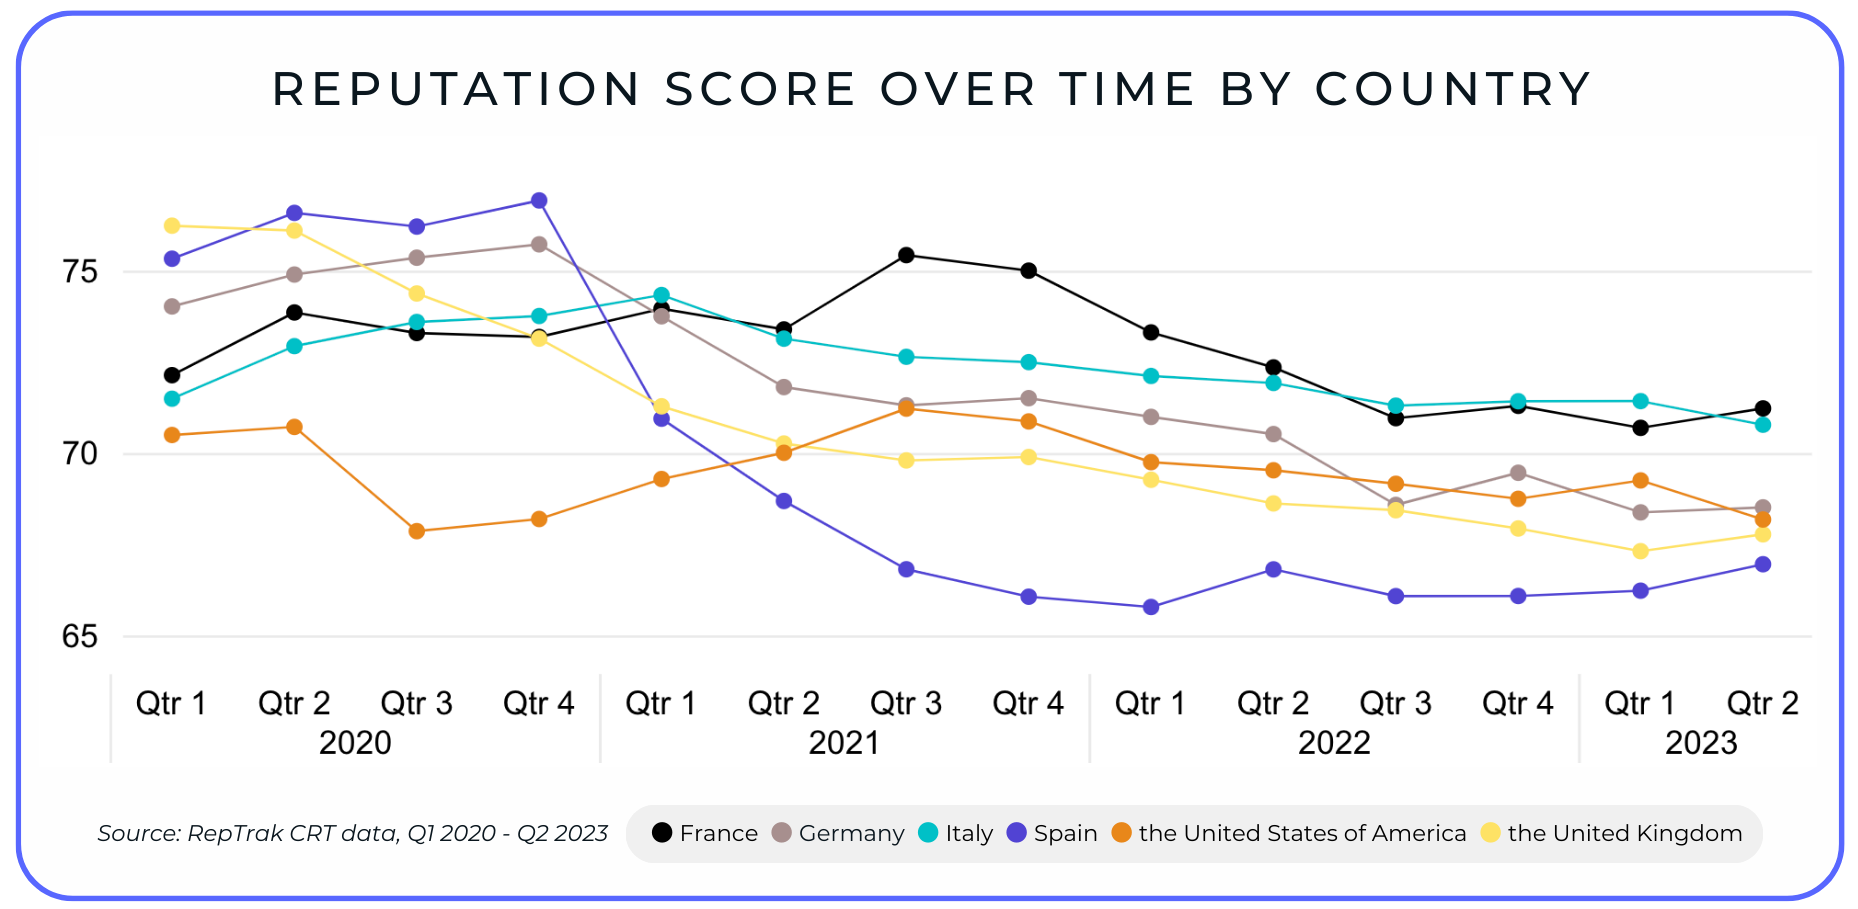 Reputation Score over time by country